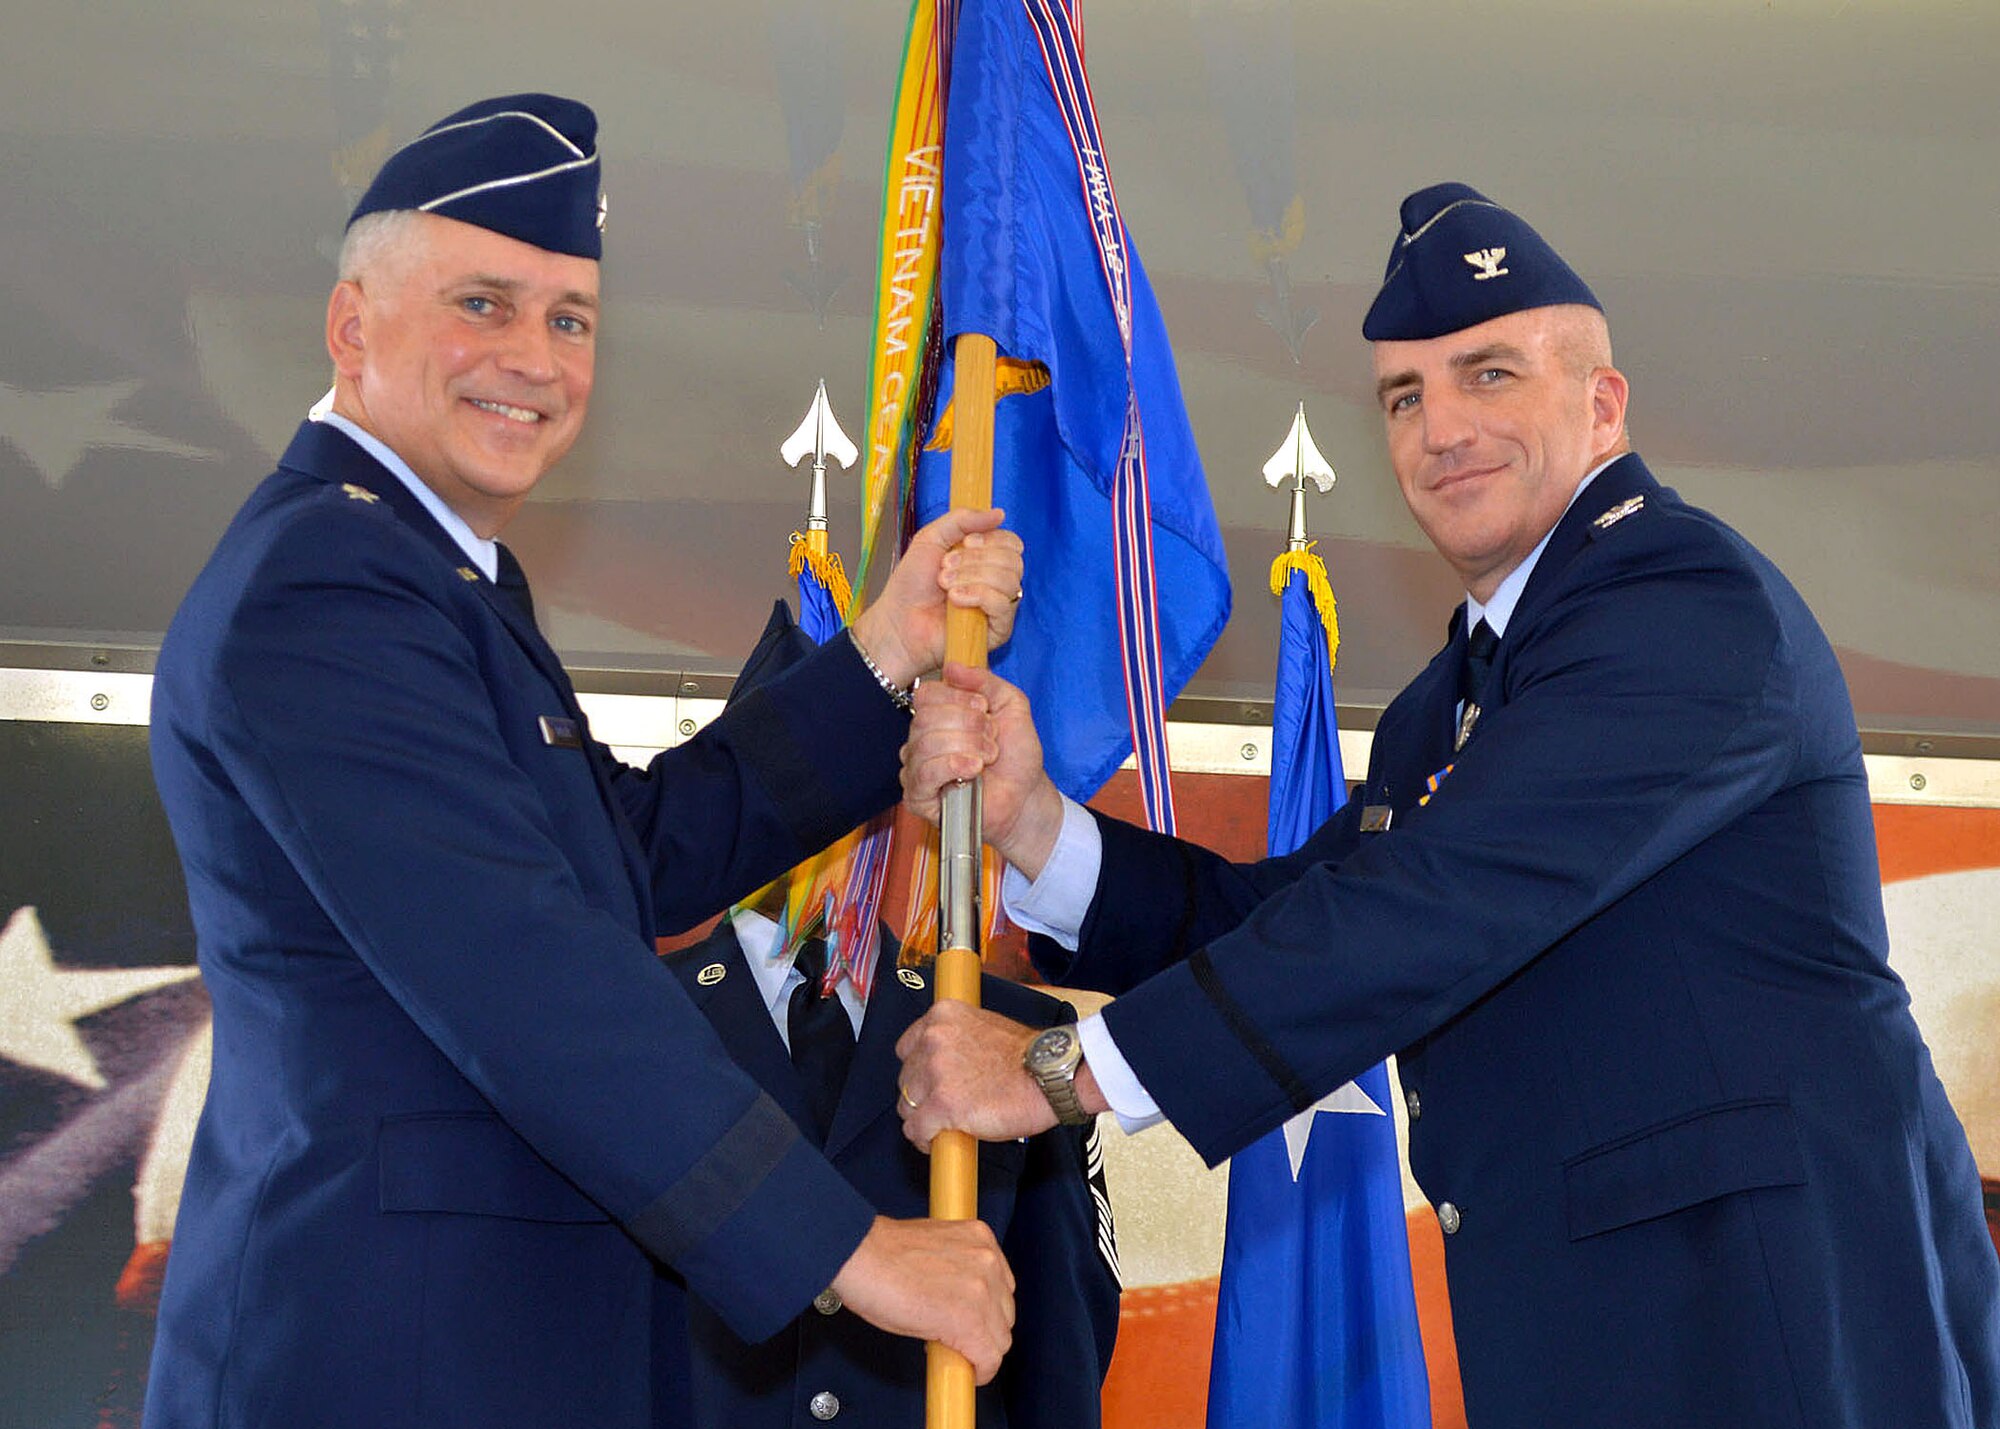 Maj. Gen. Frederick H. Martin, U.S. Air Force Expeditionary Center commander, presents the 43rd Airlift Group’s guidon to Col. Kenneth E. Moss signifying a transfer of command of the group to Moss from the outgoing commander, Col. Daniel H. Tulley, during a change of command ceremony here August 5, 2014. Prior to his current assignment, Moss was a fellow at the U.S. Navy Strategic Studies Group, in Newport, R.I. Tulley, moves on to his next assignment as the commander for the 6th Air Mobility Wing, MacDill Air Force Base, Fla. (U.S. Air Force photo/Marvin Krause)